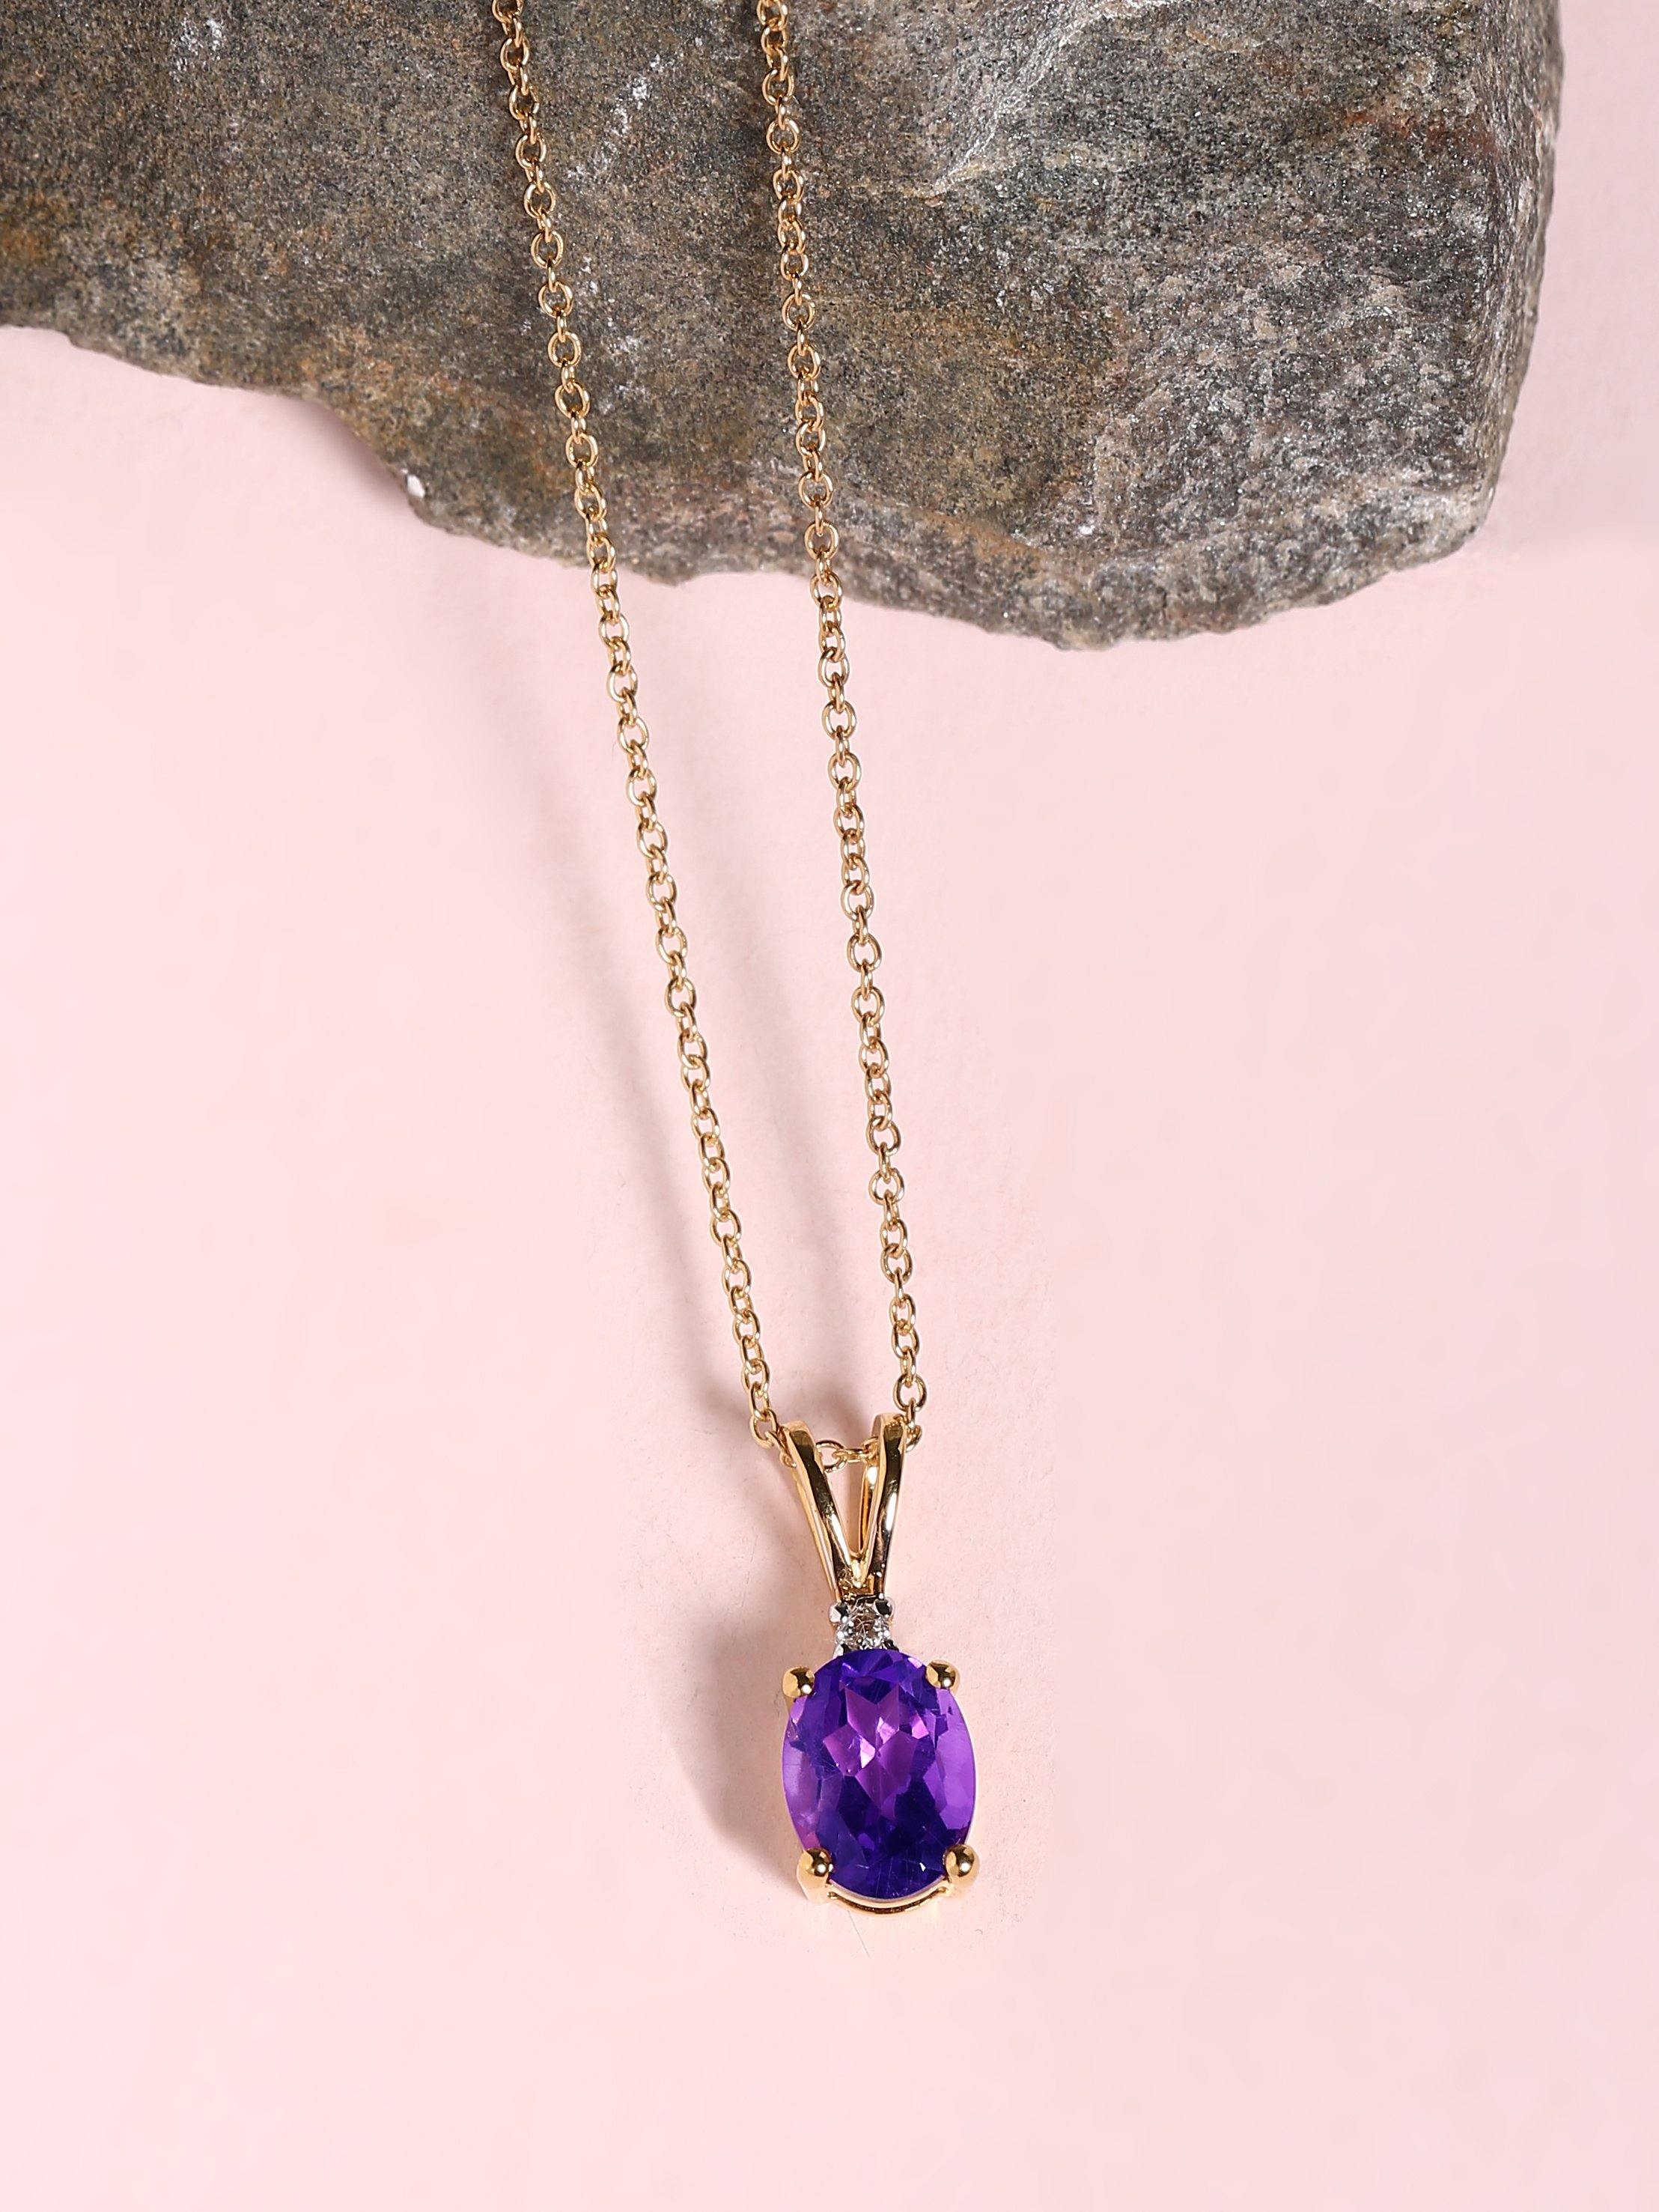 1.13 Ct. Amethyst Solid 10k Yellow Gold Chain Pendant Necklace Jewelry - YoTreasure